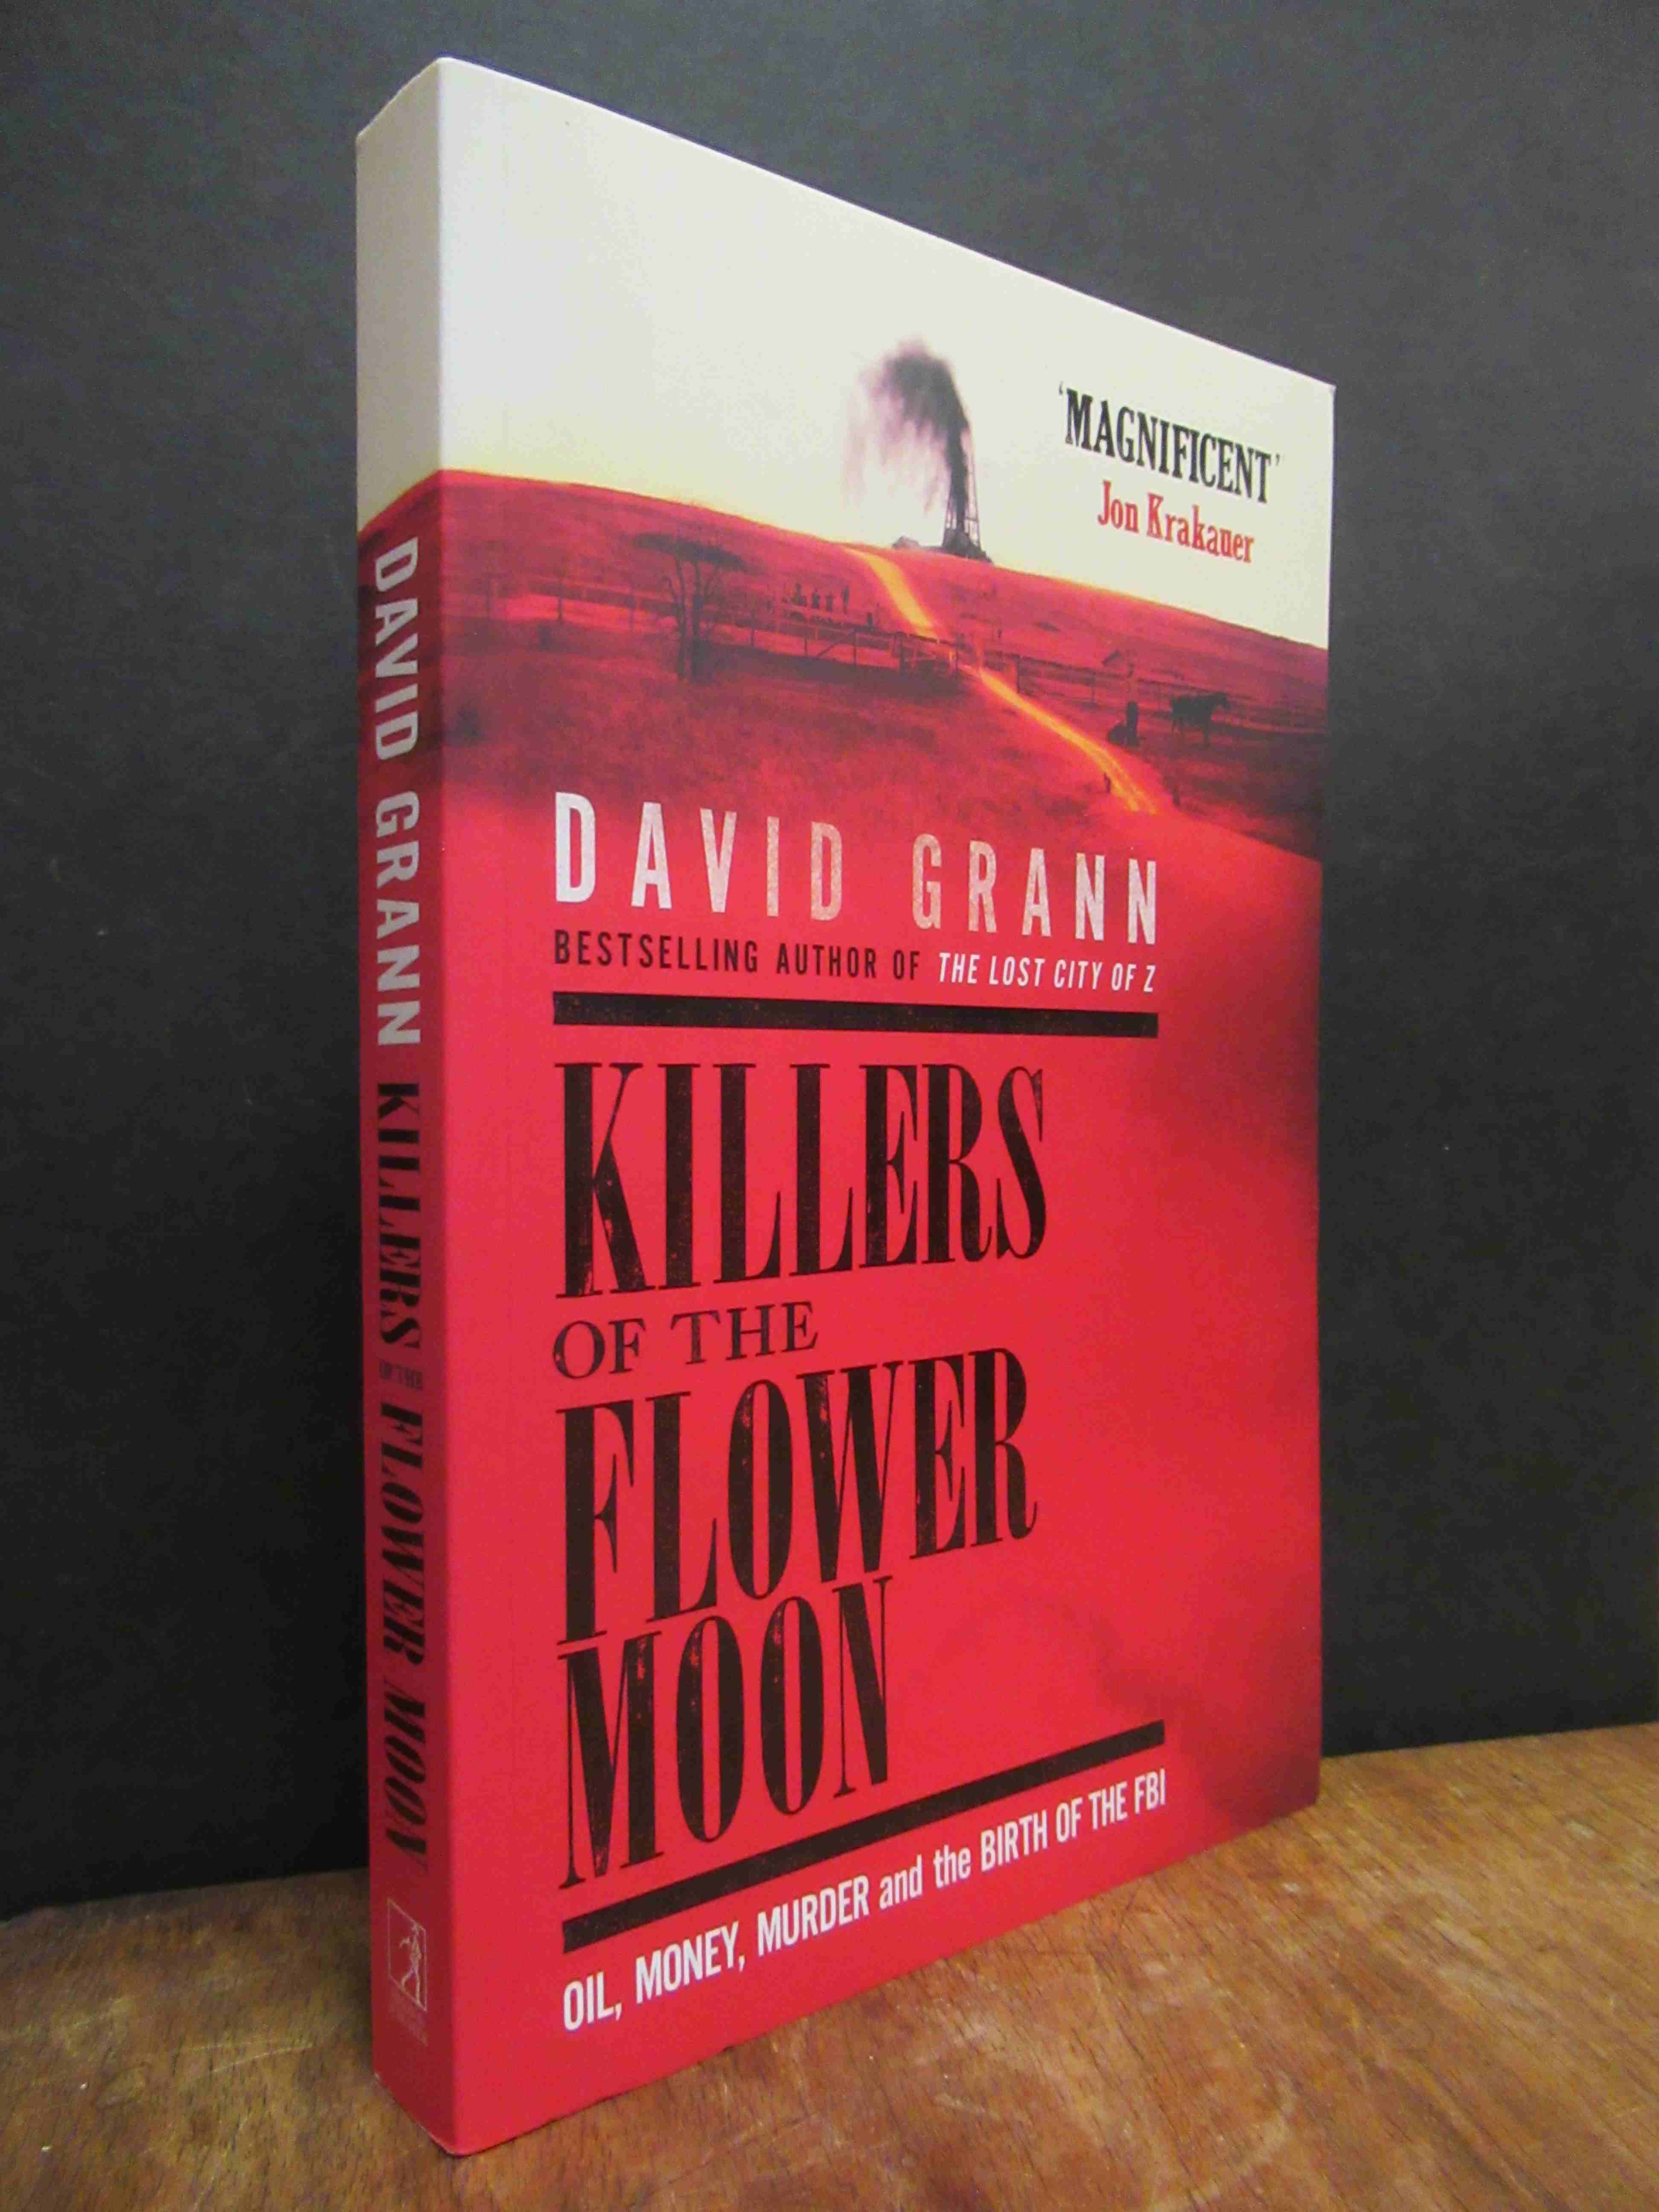 Grann, Killers of the Flower Moon – Oil, Money, Murder and the Birth of the FBI,